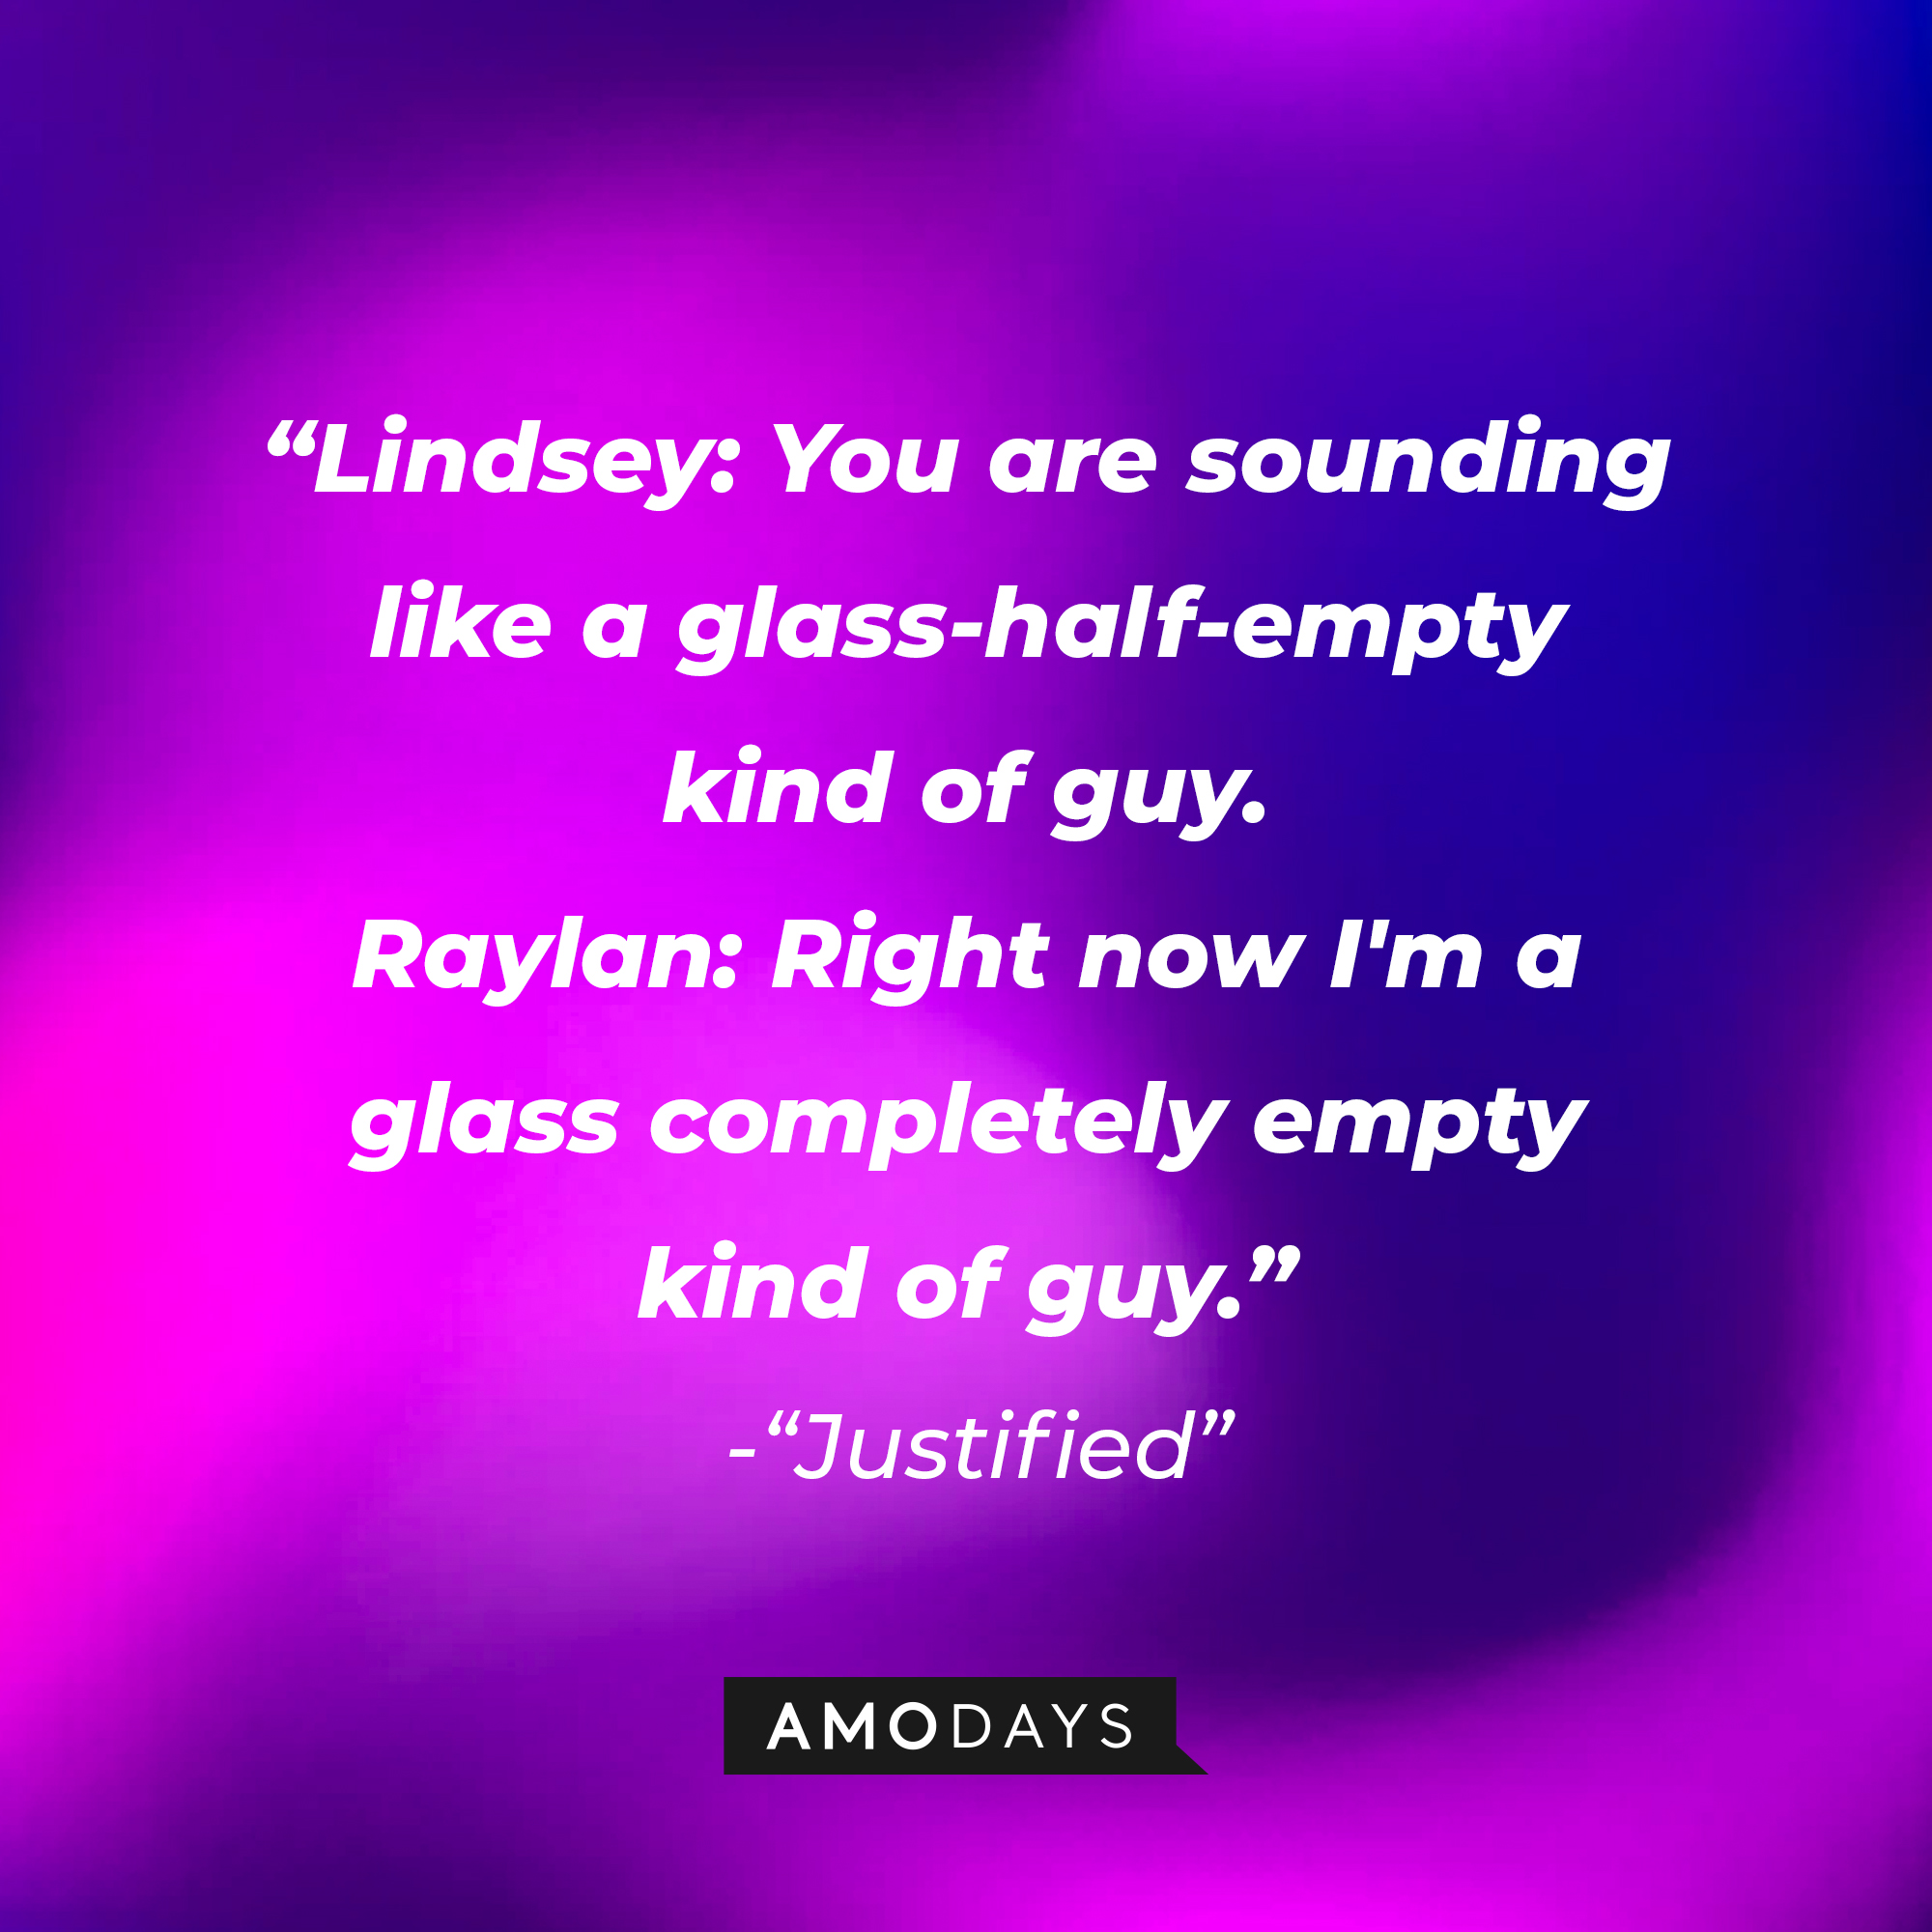 Quote from “Justified”: “Lindsey: You are sounding like a glass-half-empty kind of guy. Raylan: Right now I'm a glass completely empty kind of guy.” | Source: AmoDays